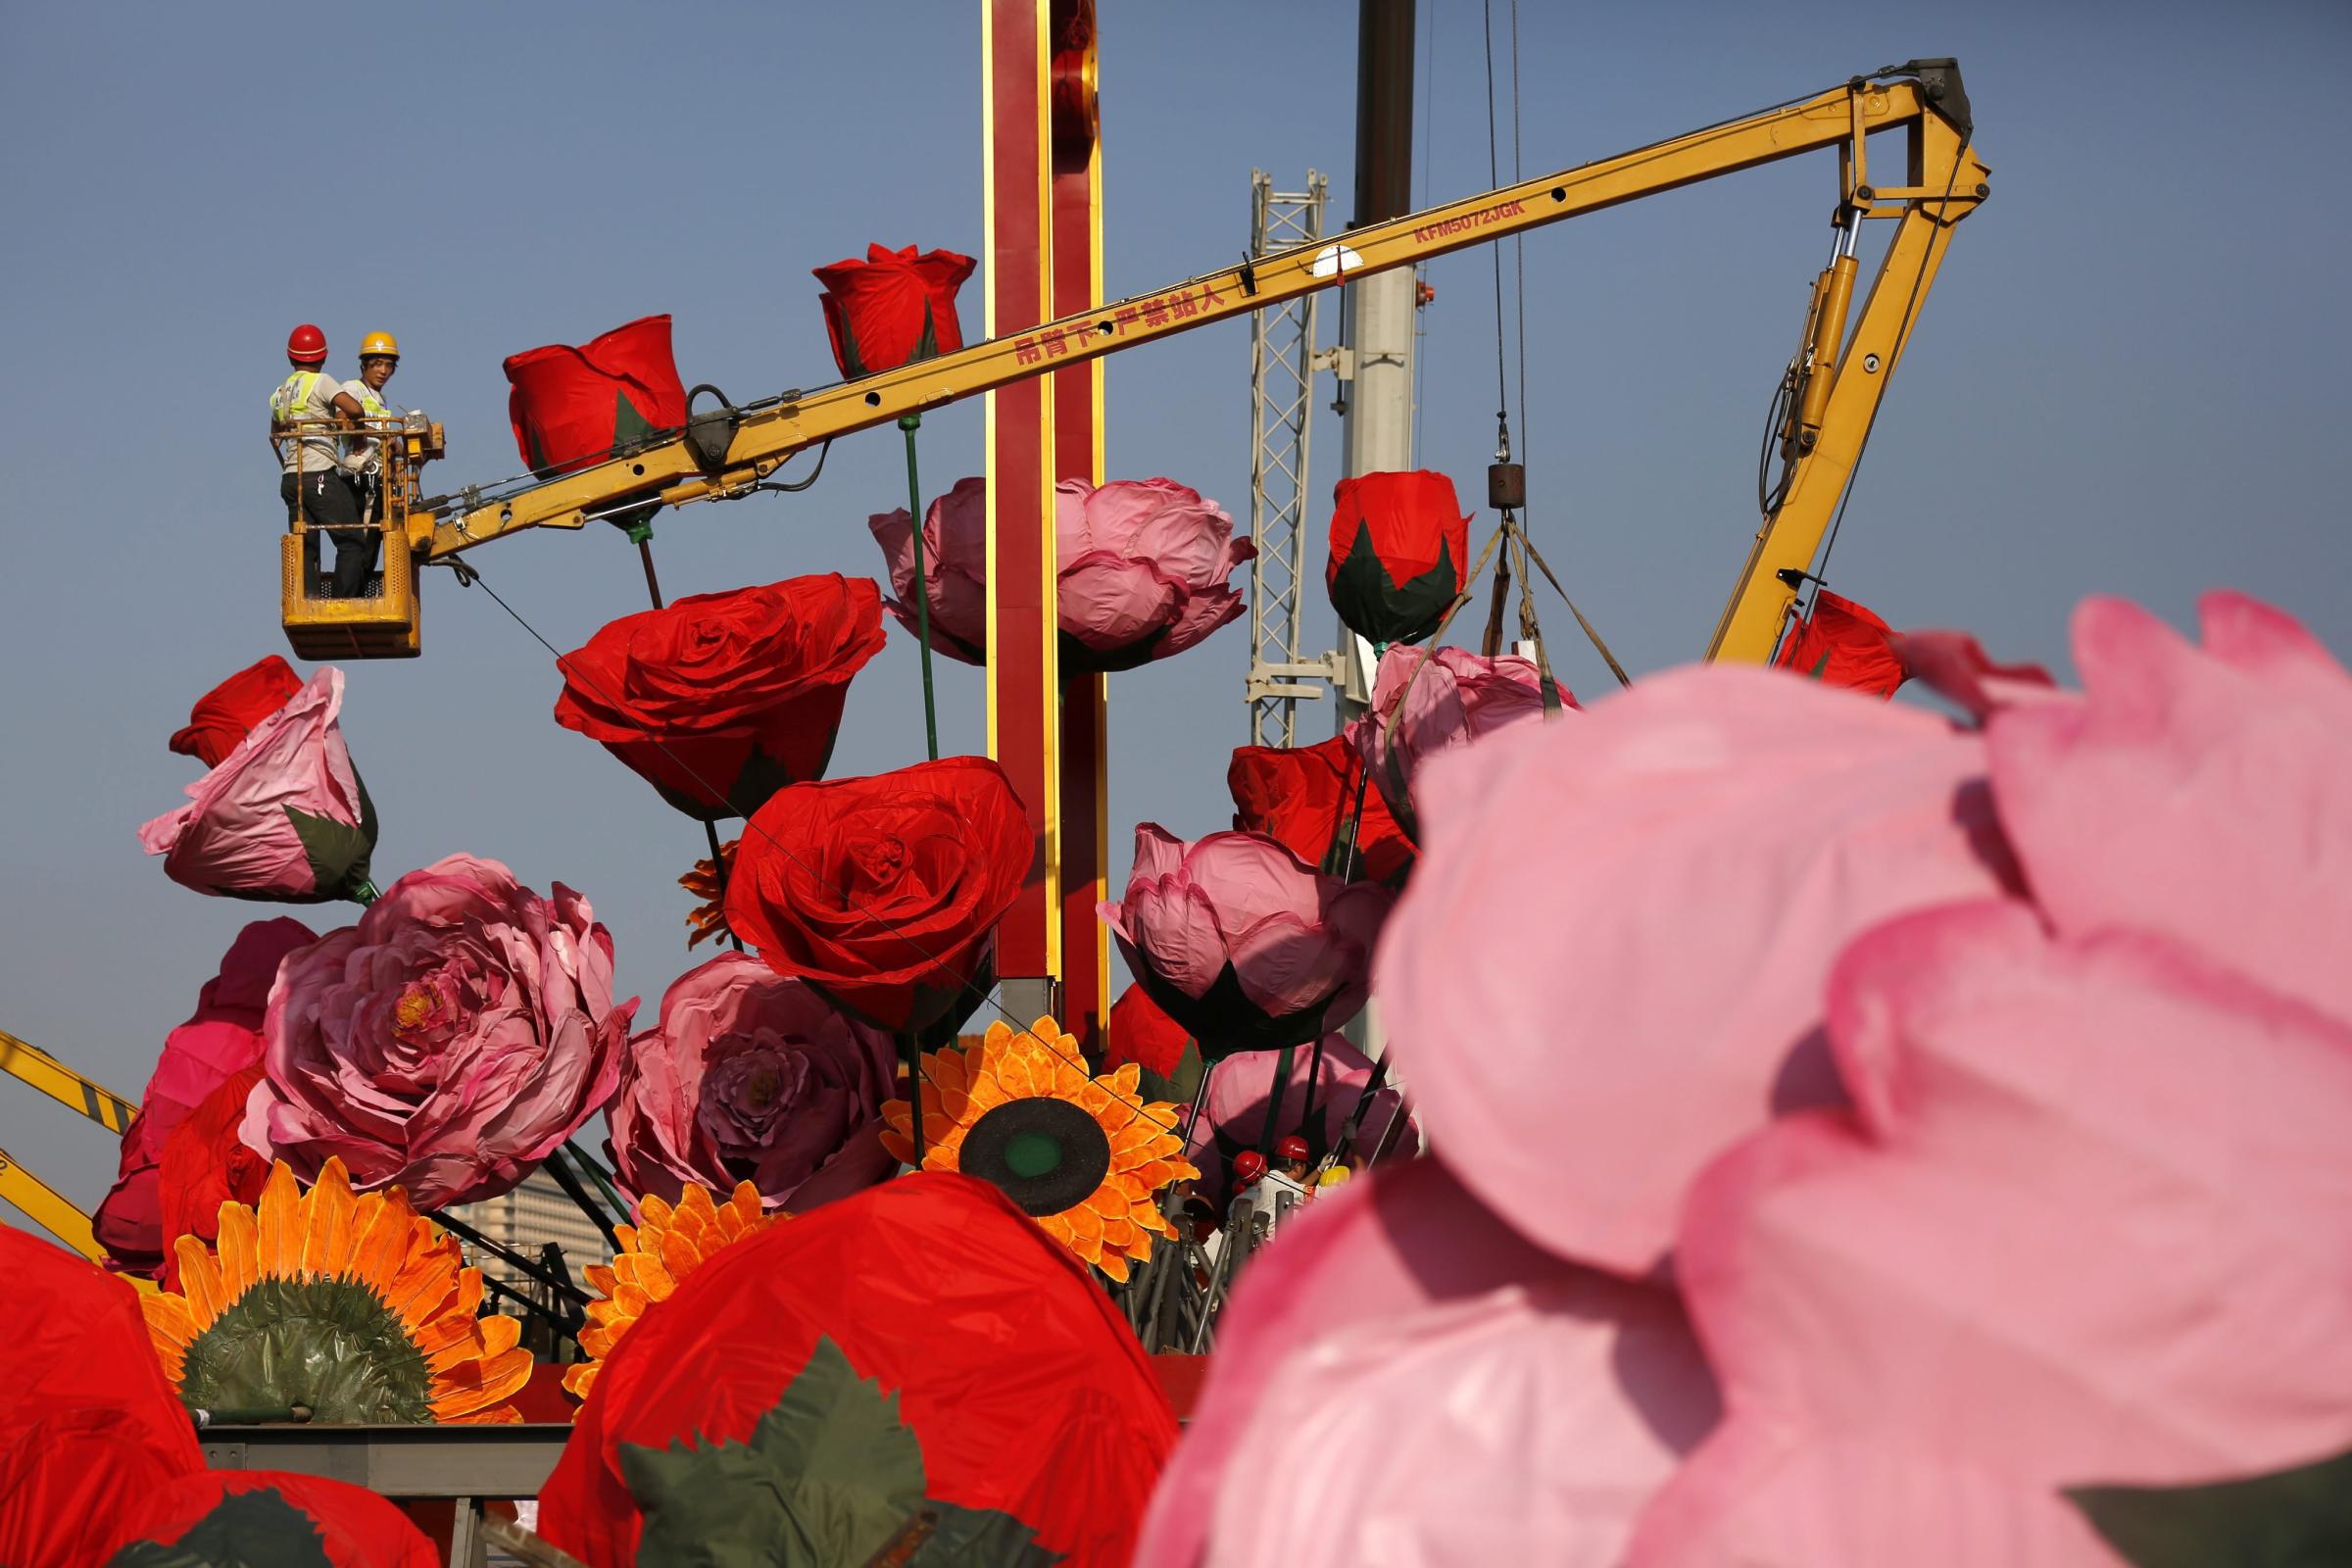 Chinese workers set up giant decoration flowers in preparation for National Day at Tiananmen Square in Beijing, China on Sept. 18, 2014.